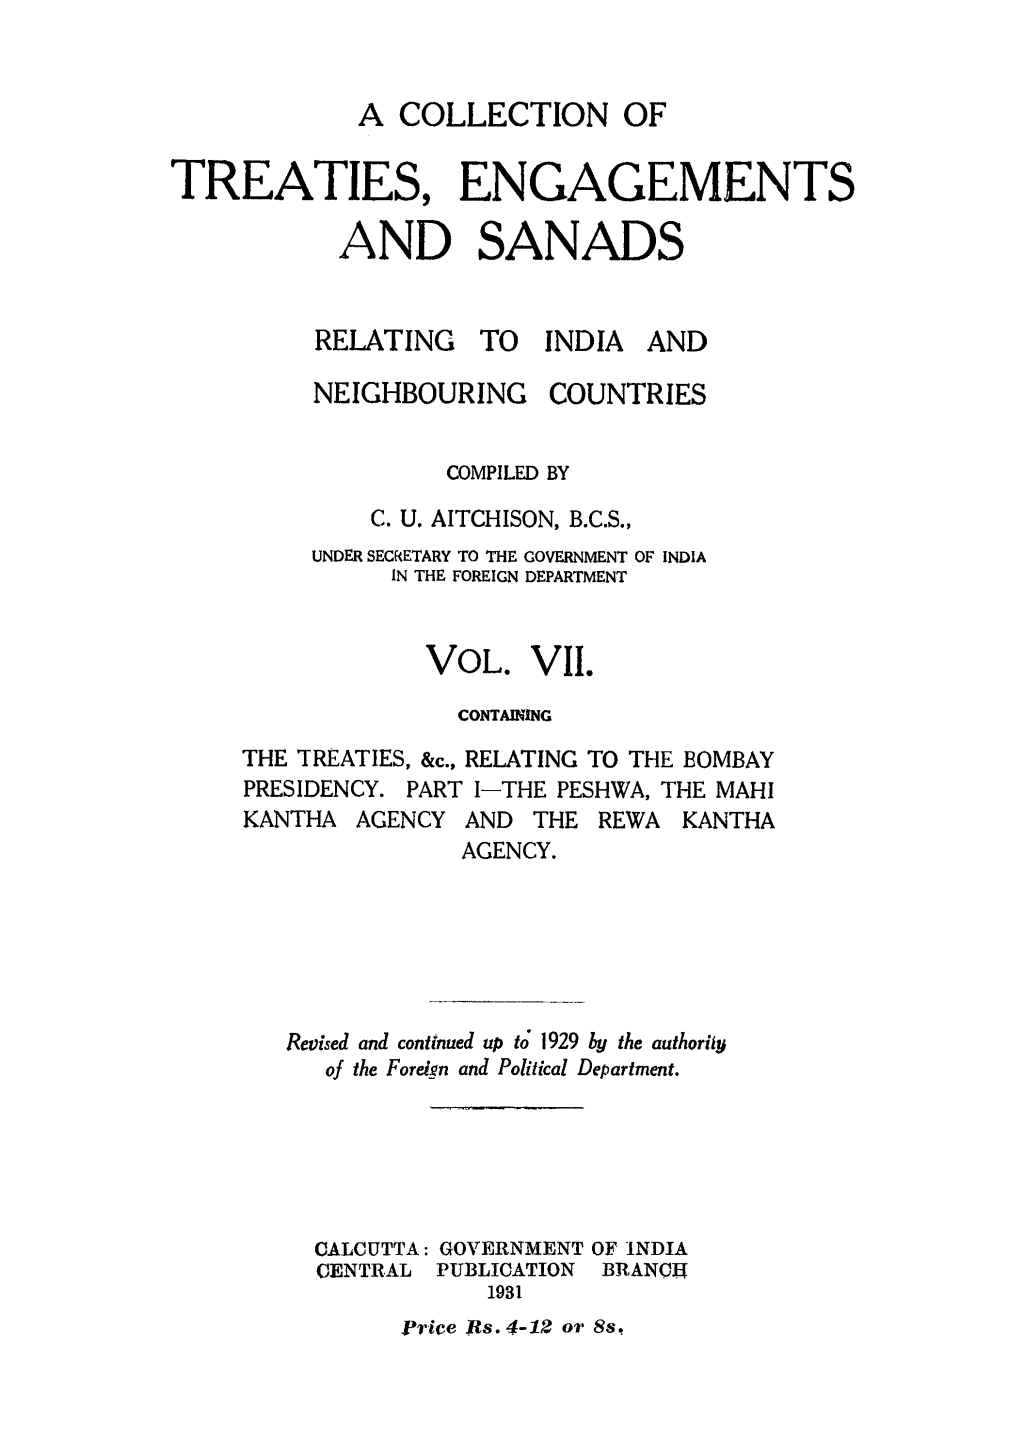 Treaties, Engagements and Sanads